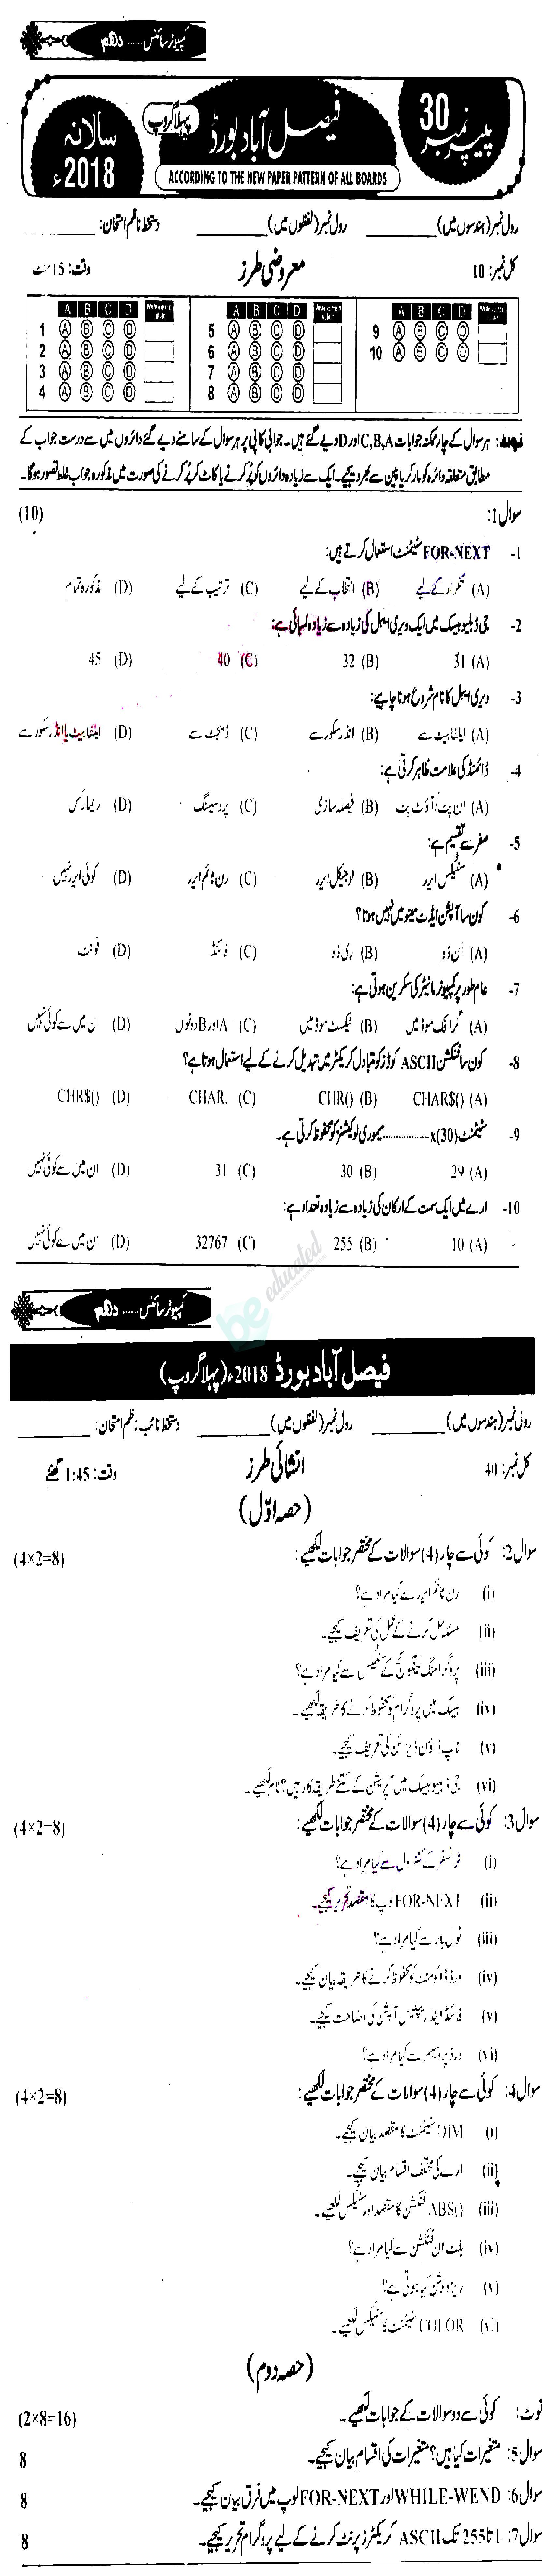 Computer Science 10th class Past Paper Group 1 BISE Faisalabad 2018